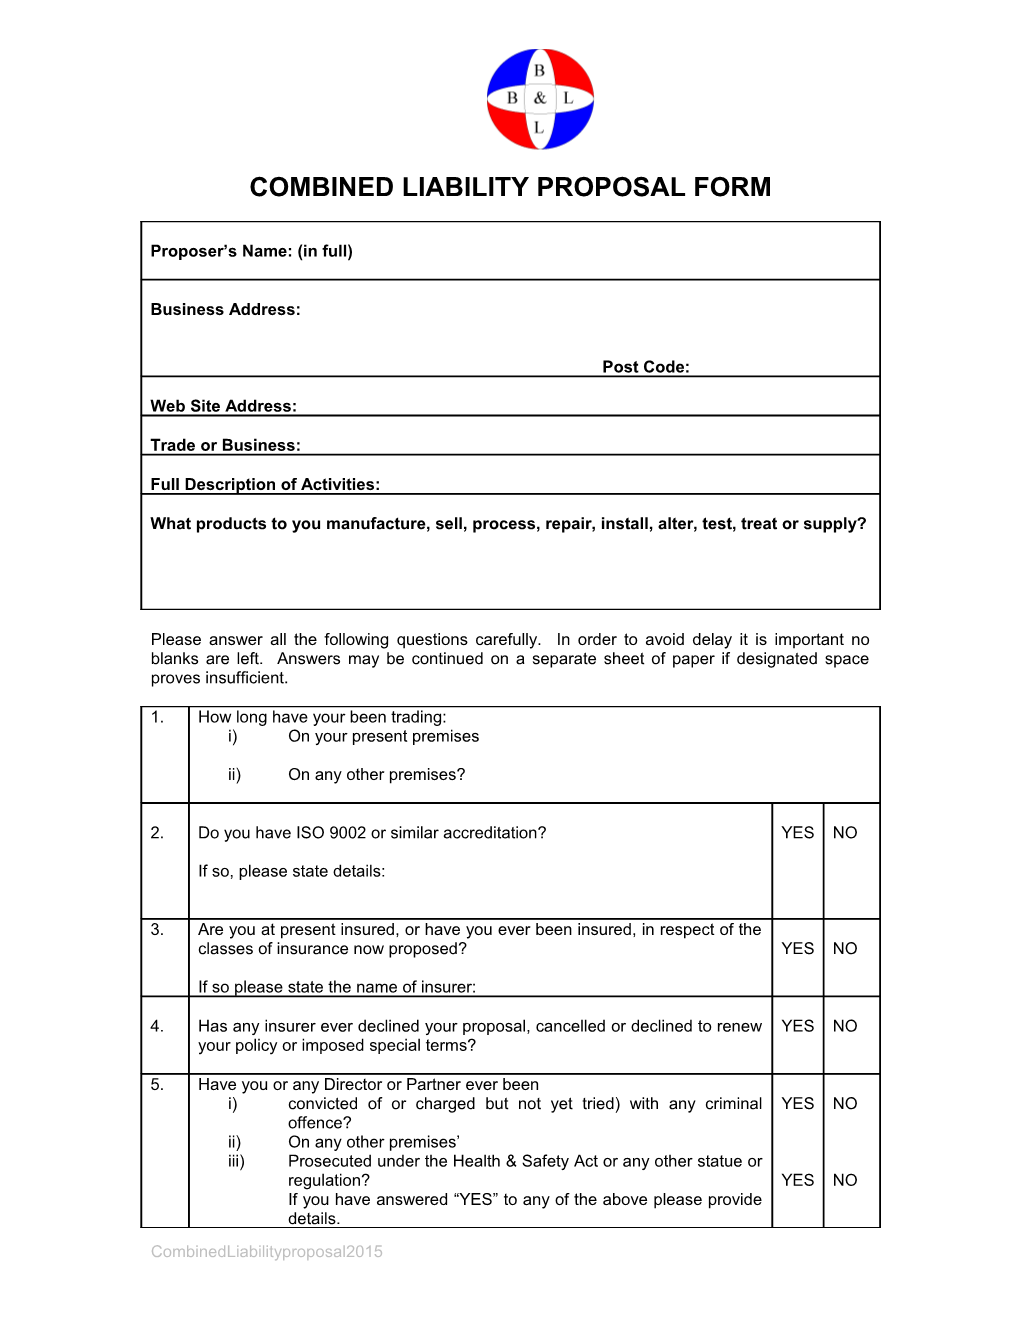 Combined Liability Proposal Form